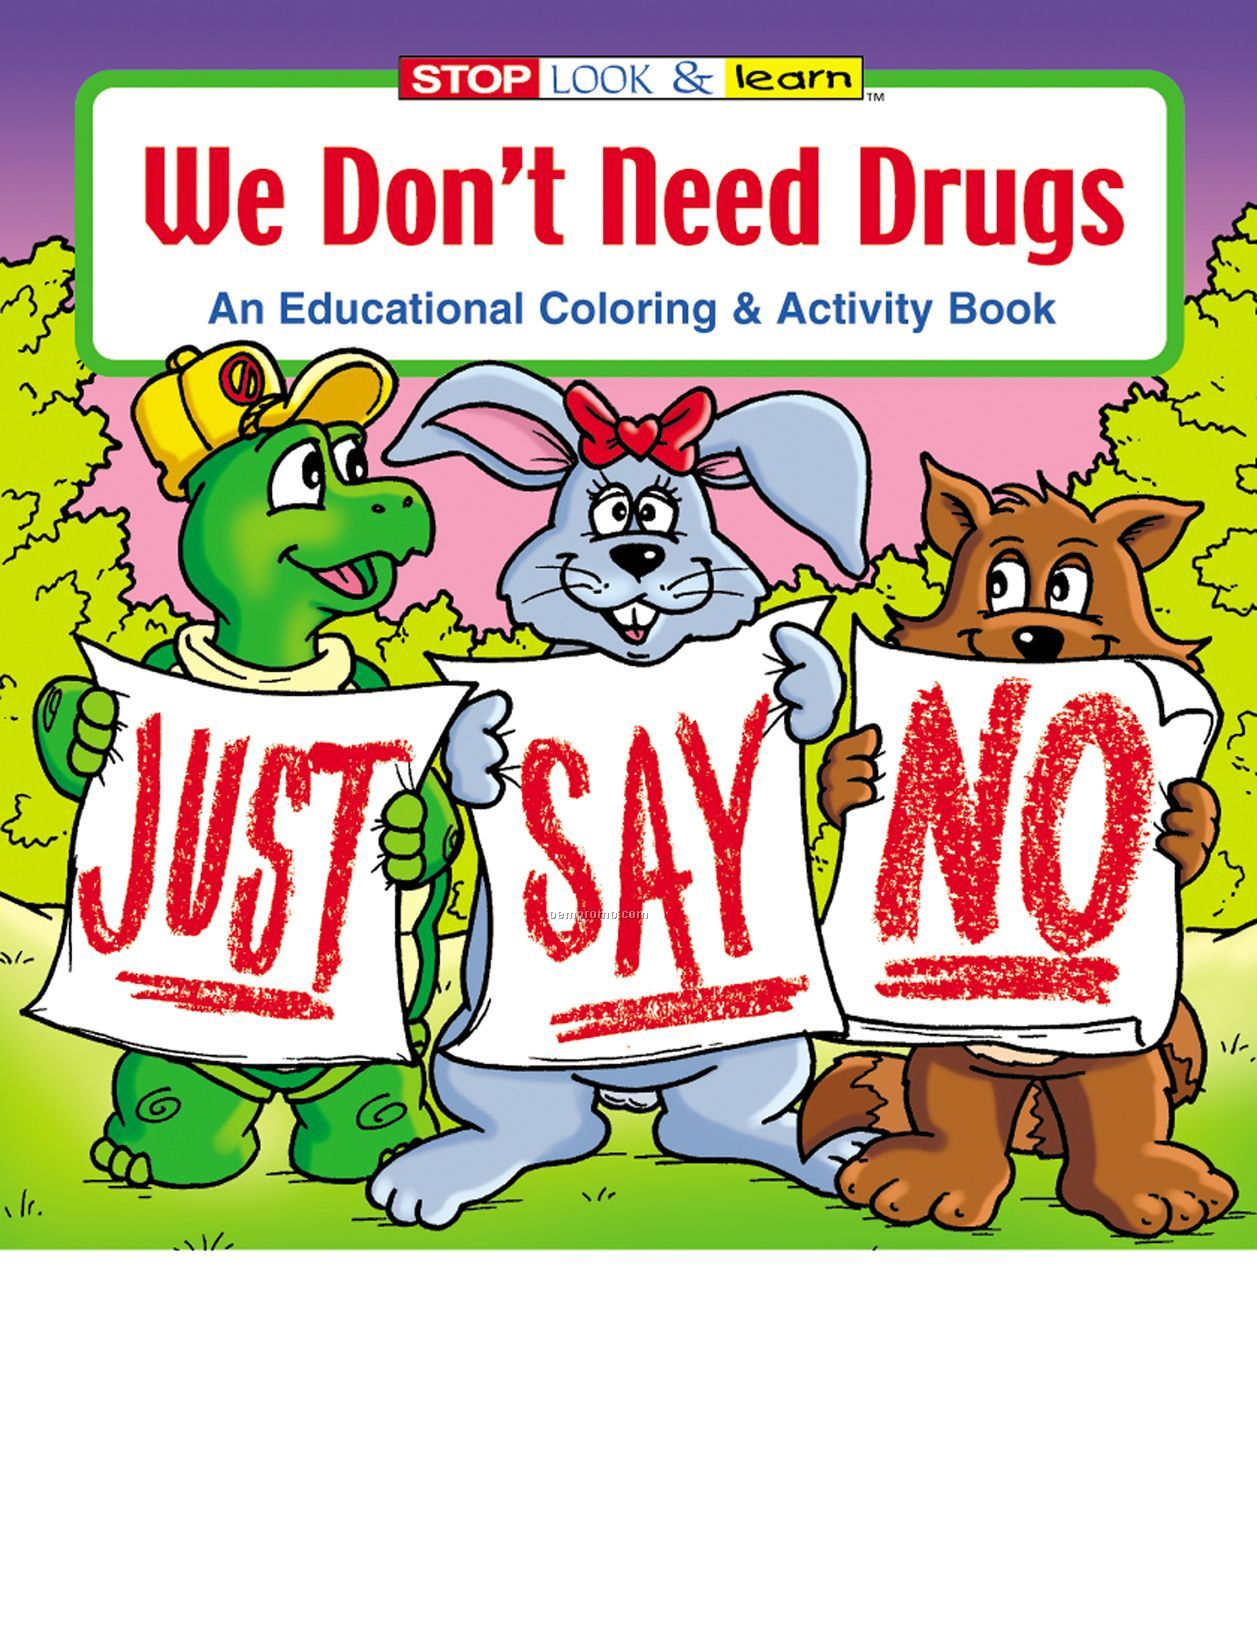 We Don't Need Drugs Fun Pack